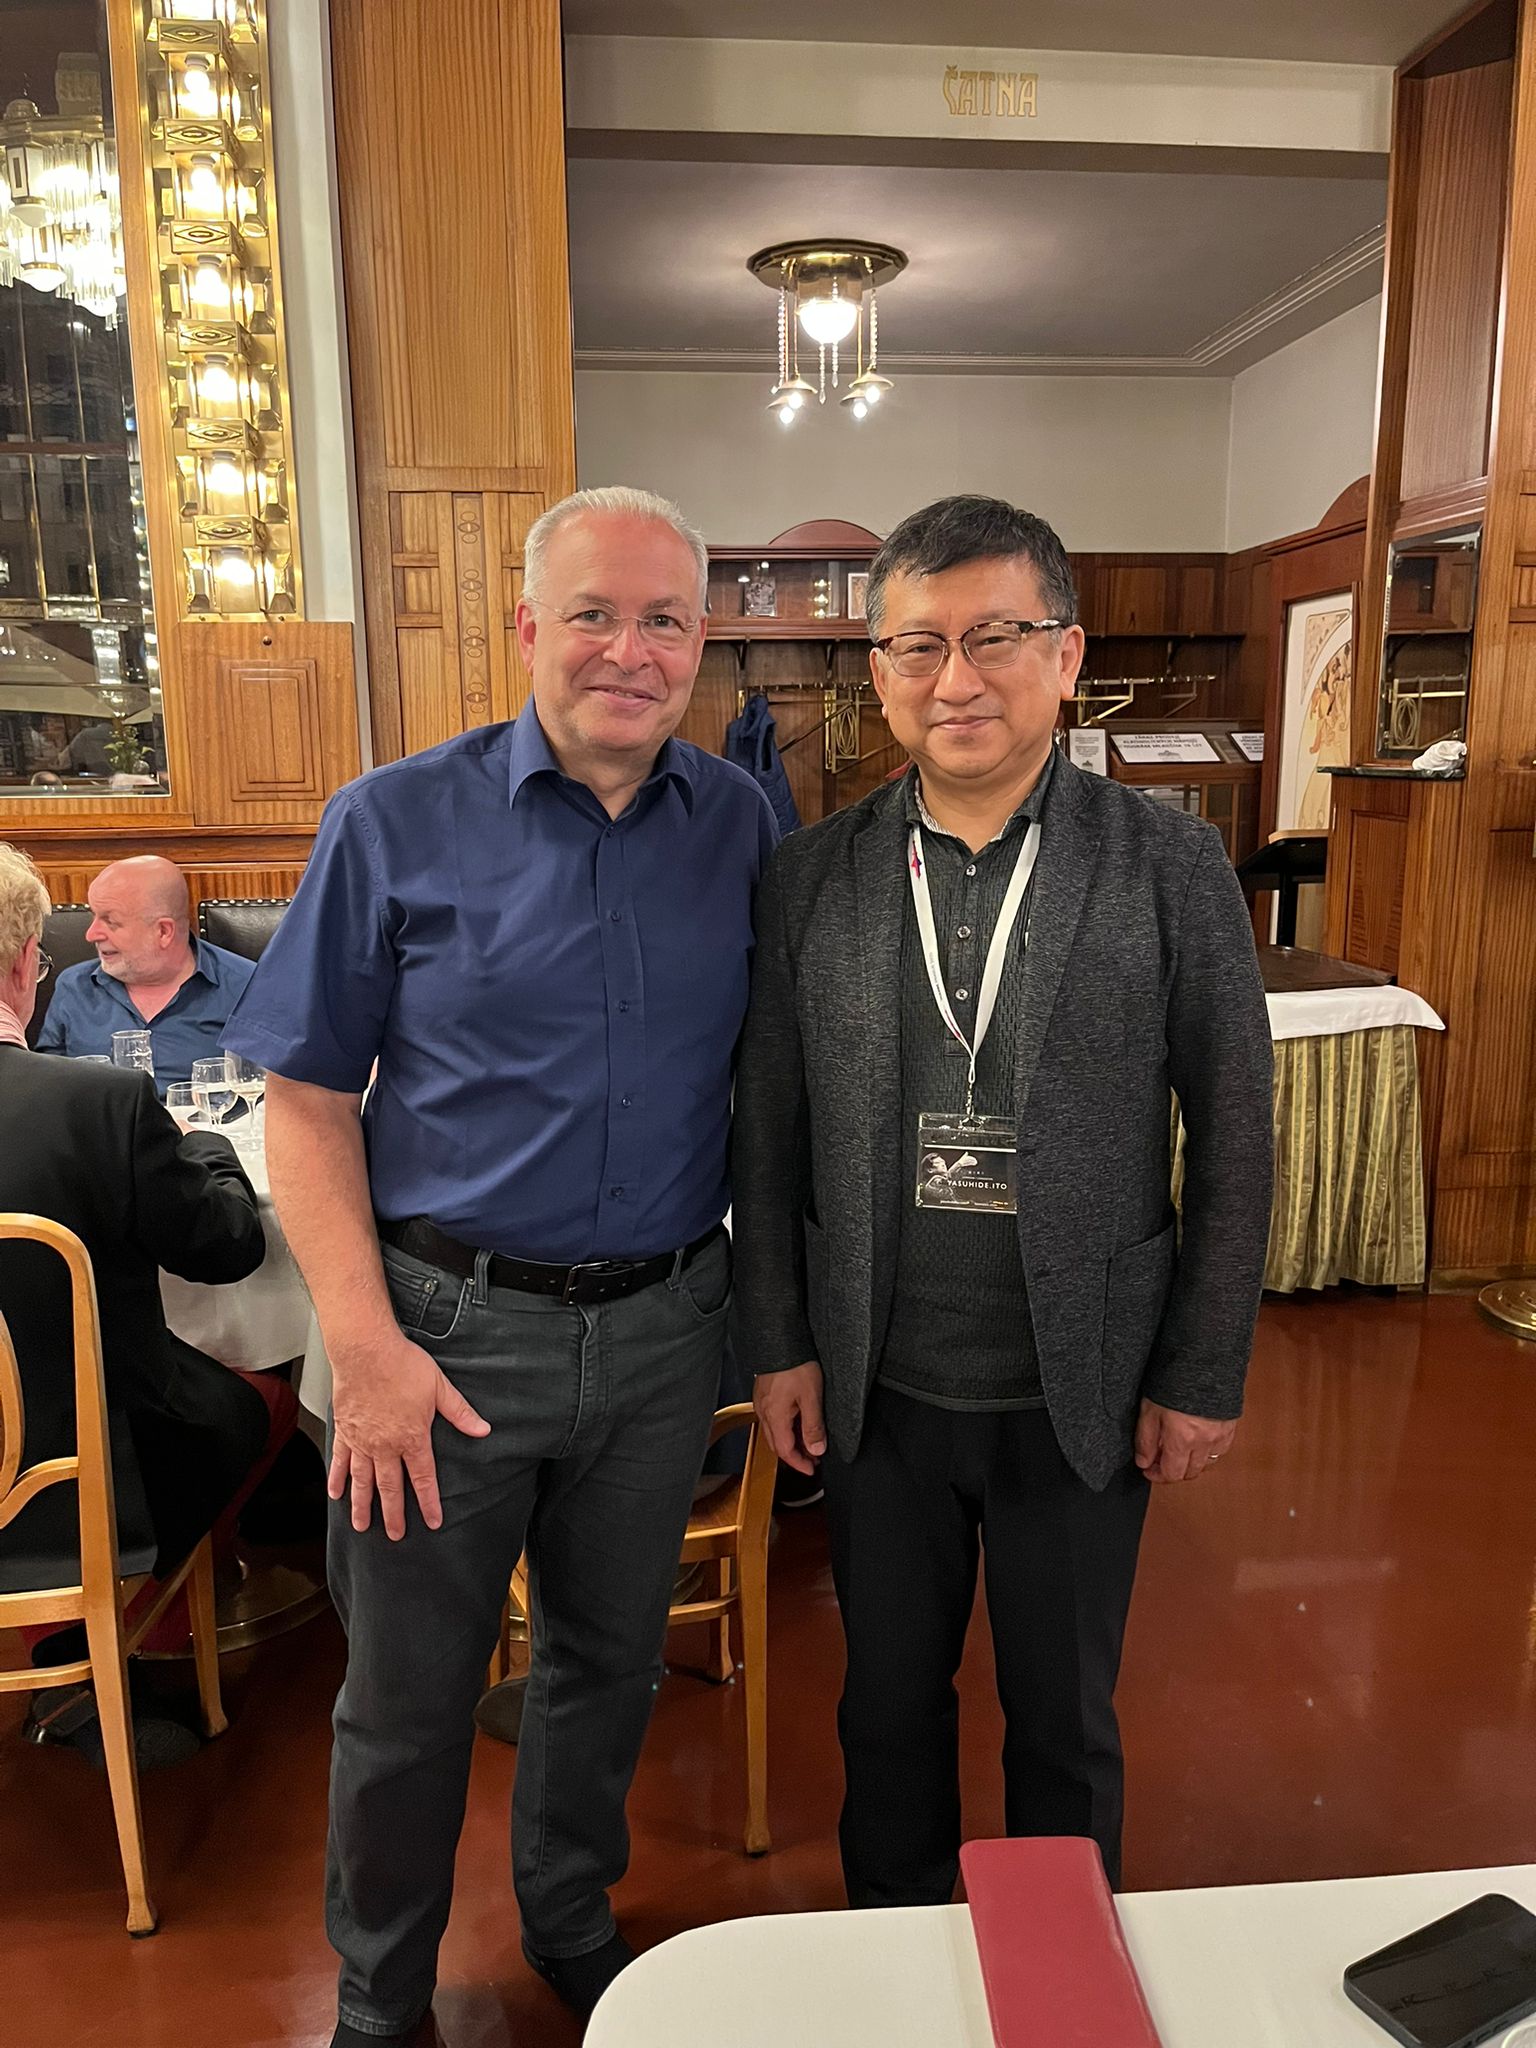 Franco Cesarini & Yasuhide Ito at the WASBE Conference in Prague (Czech Republic), 19th-23rd July 2022